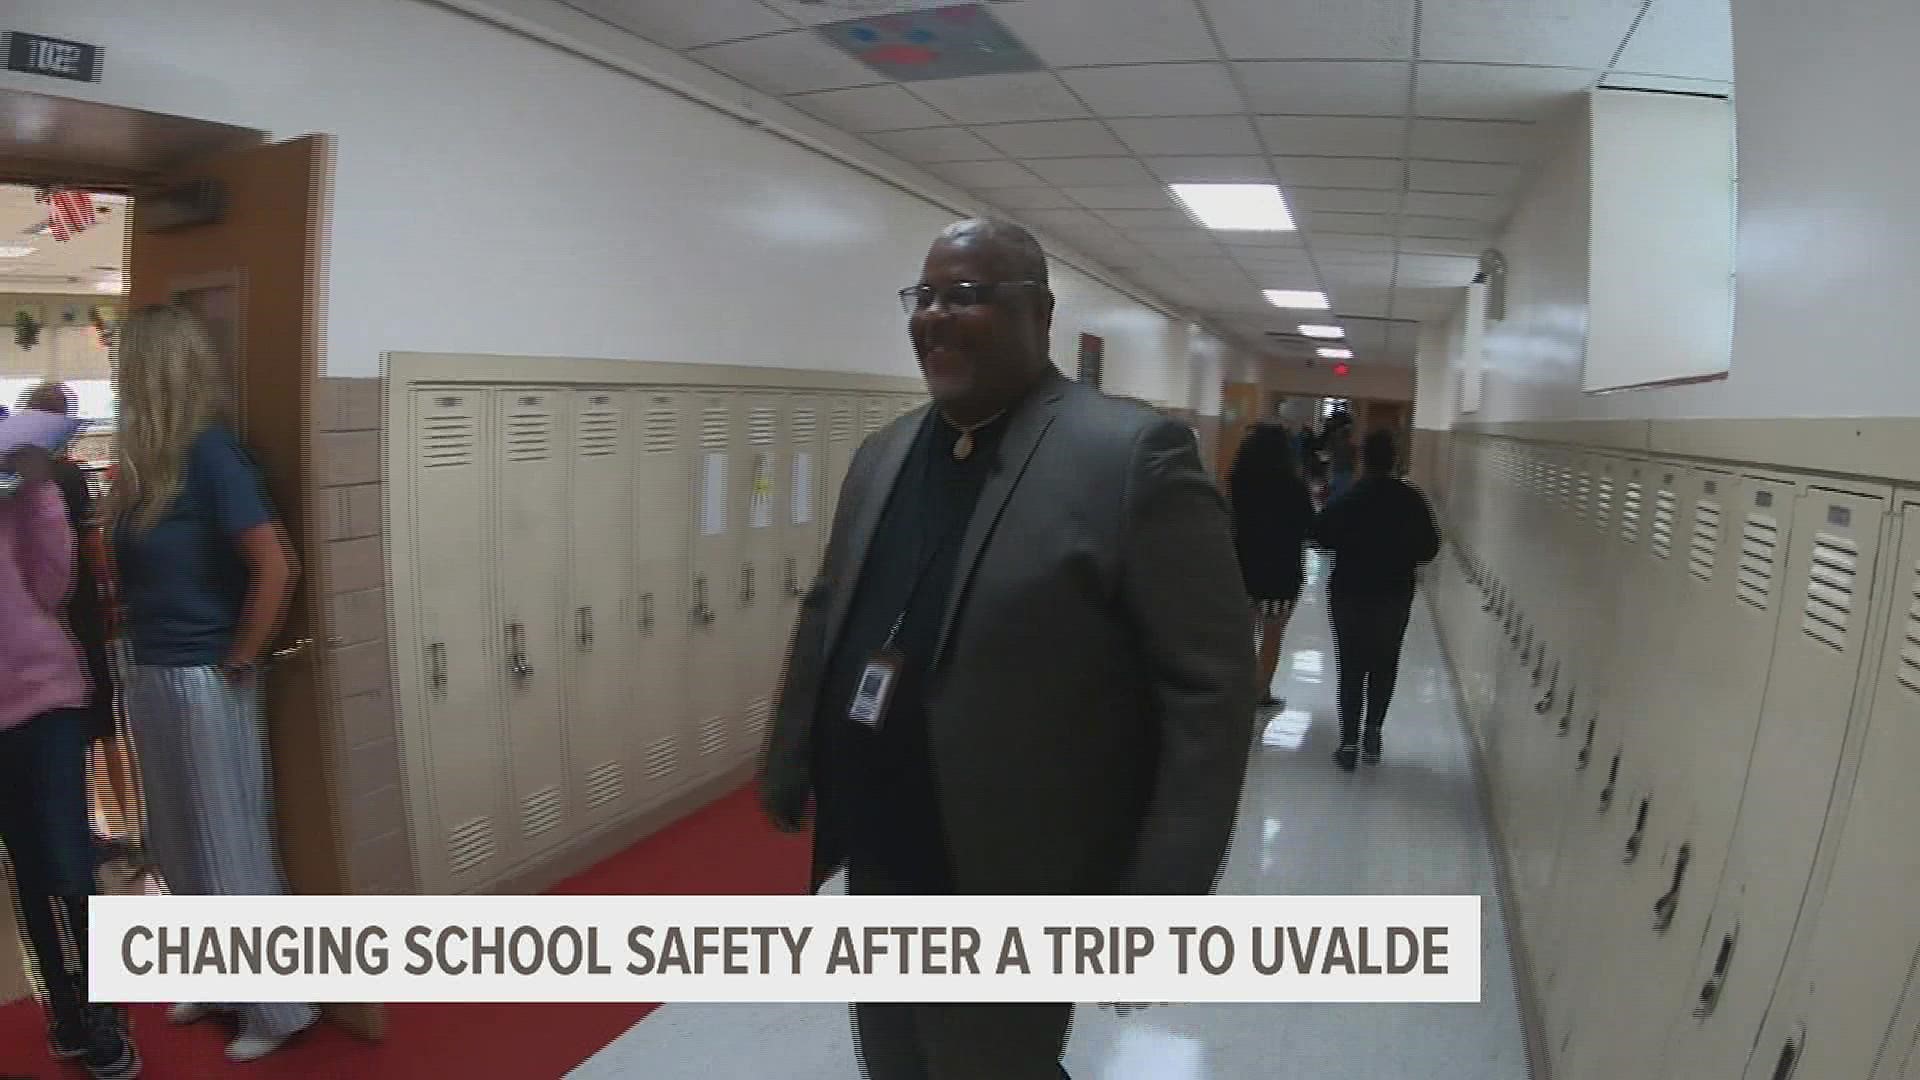 Charles Butler is the RIMSD security manager. After Uvalde's shooting, he took it upon himself to make the trip to Texas to learn how to prevent another tragedy.